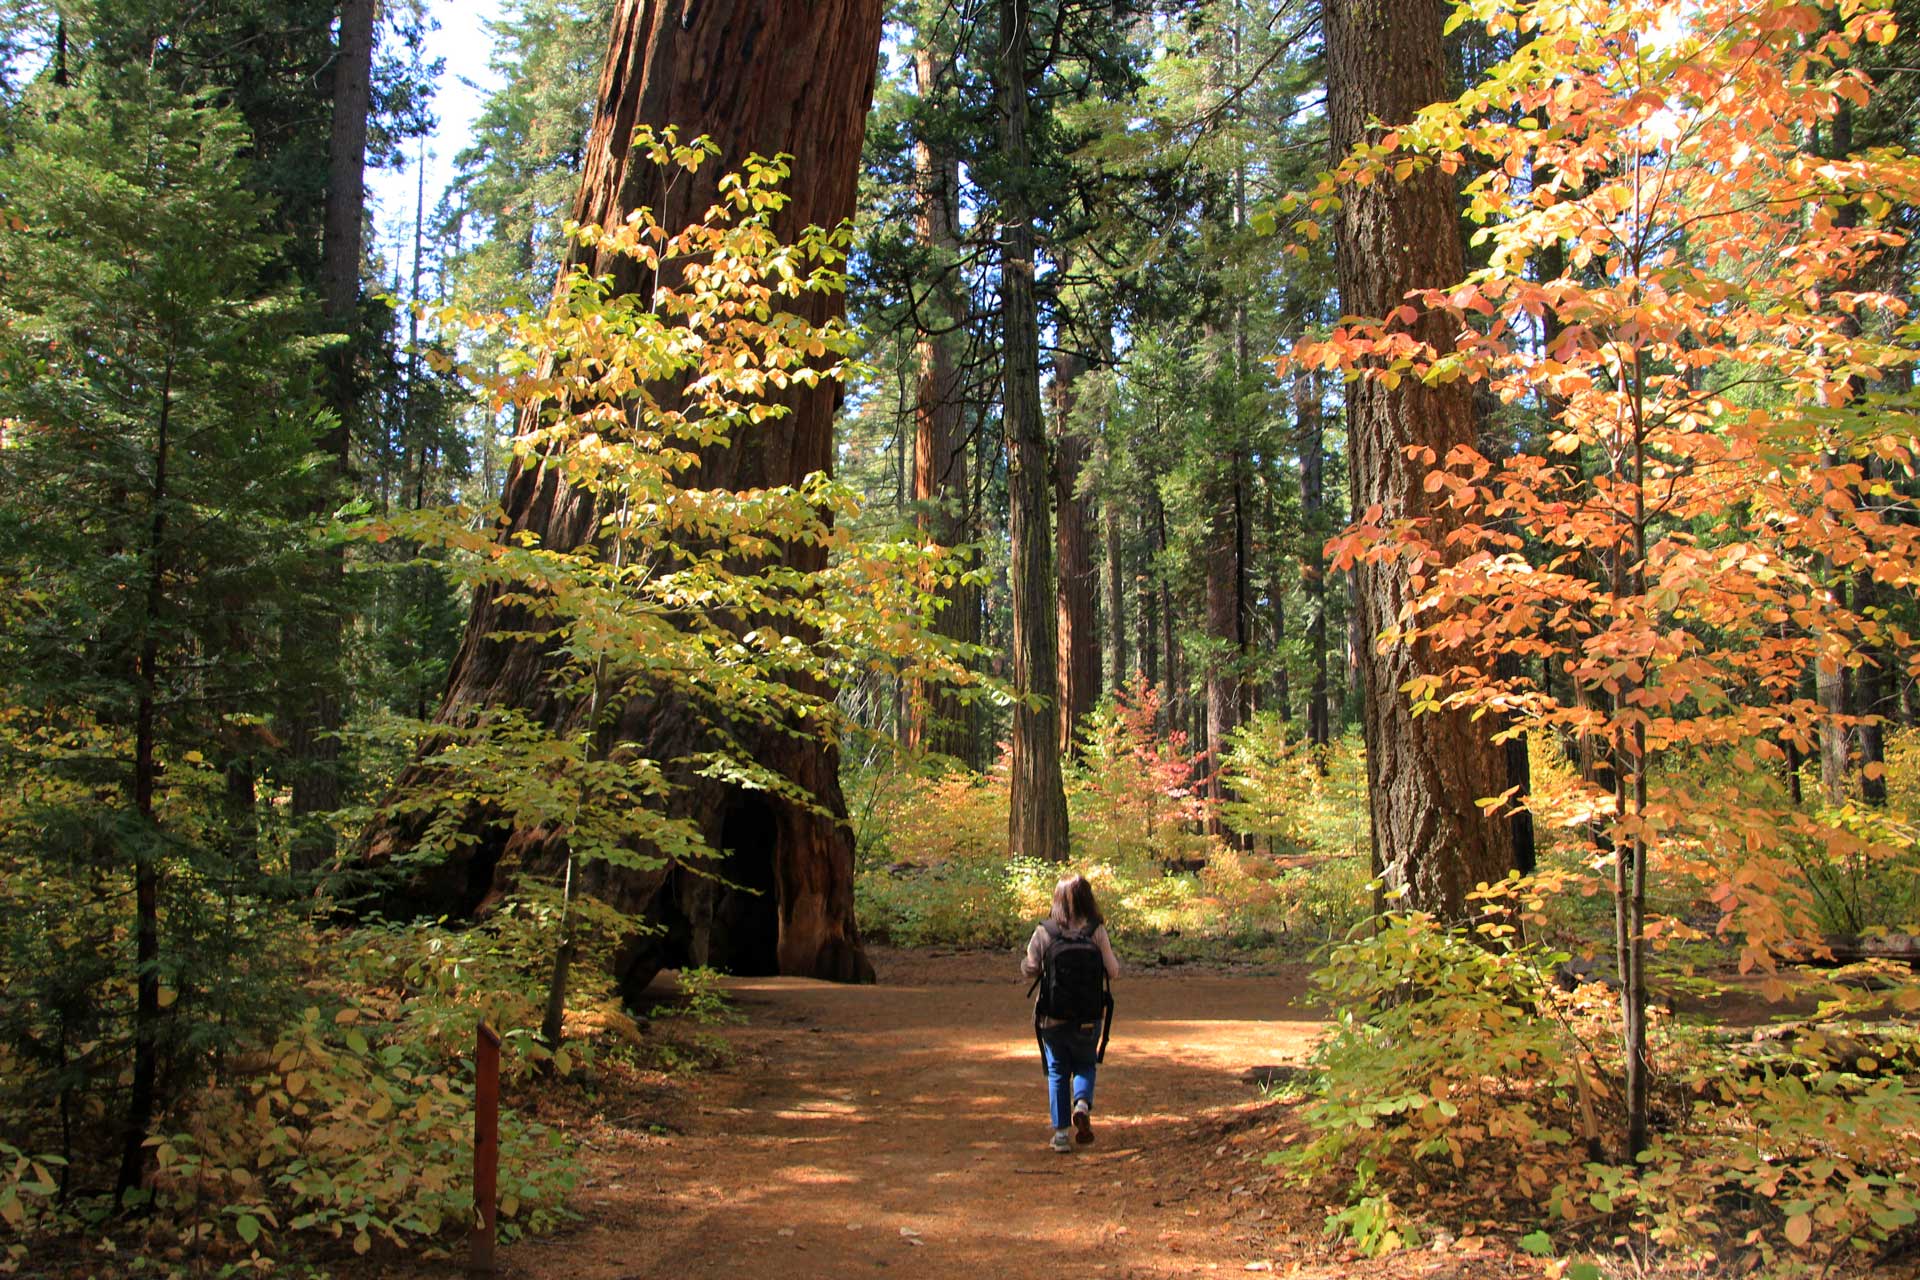 Calaveras Big Trees State Park Recreation among the giant sequoias